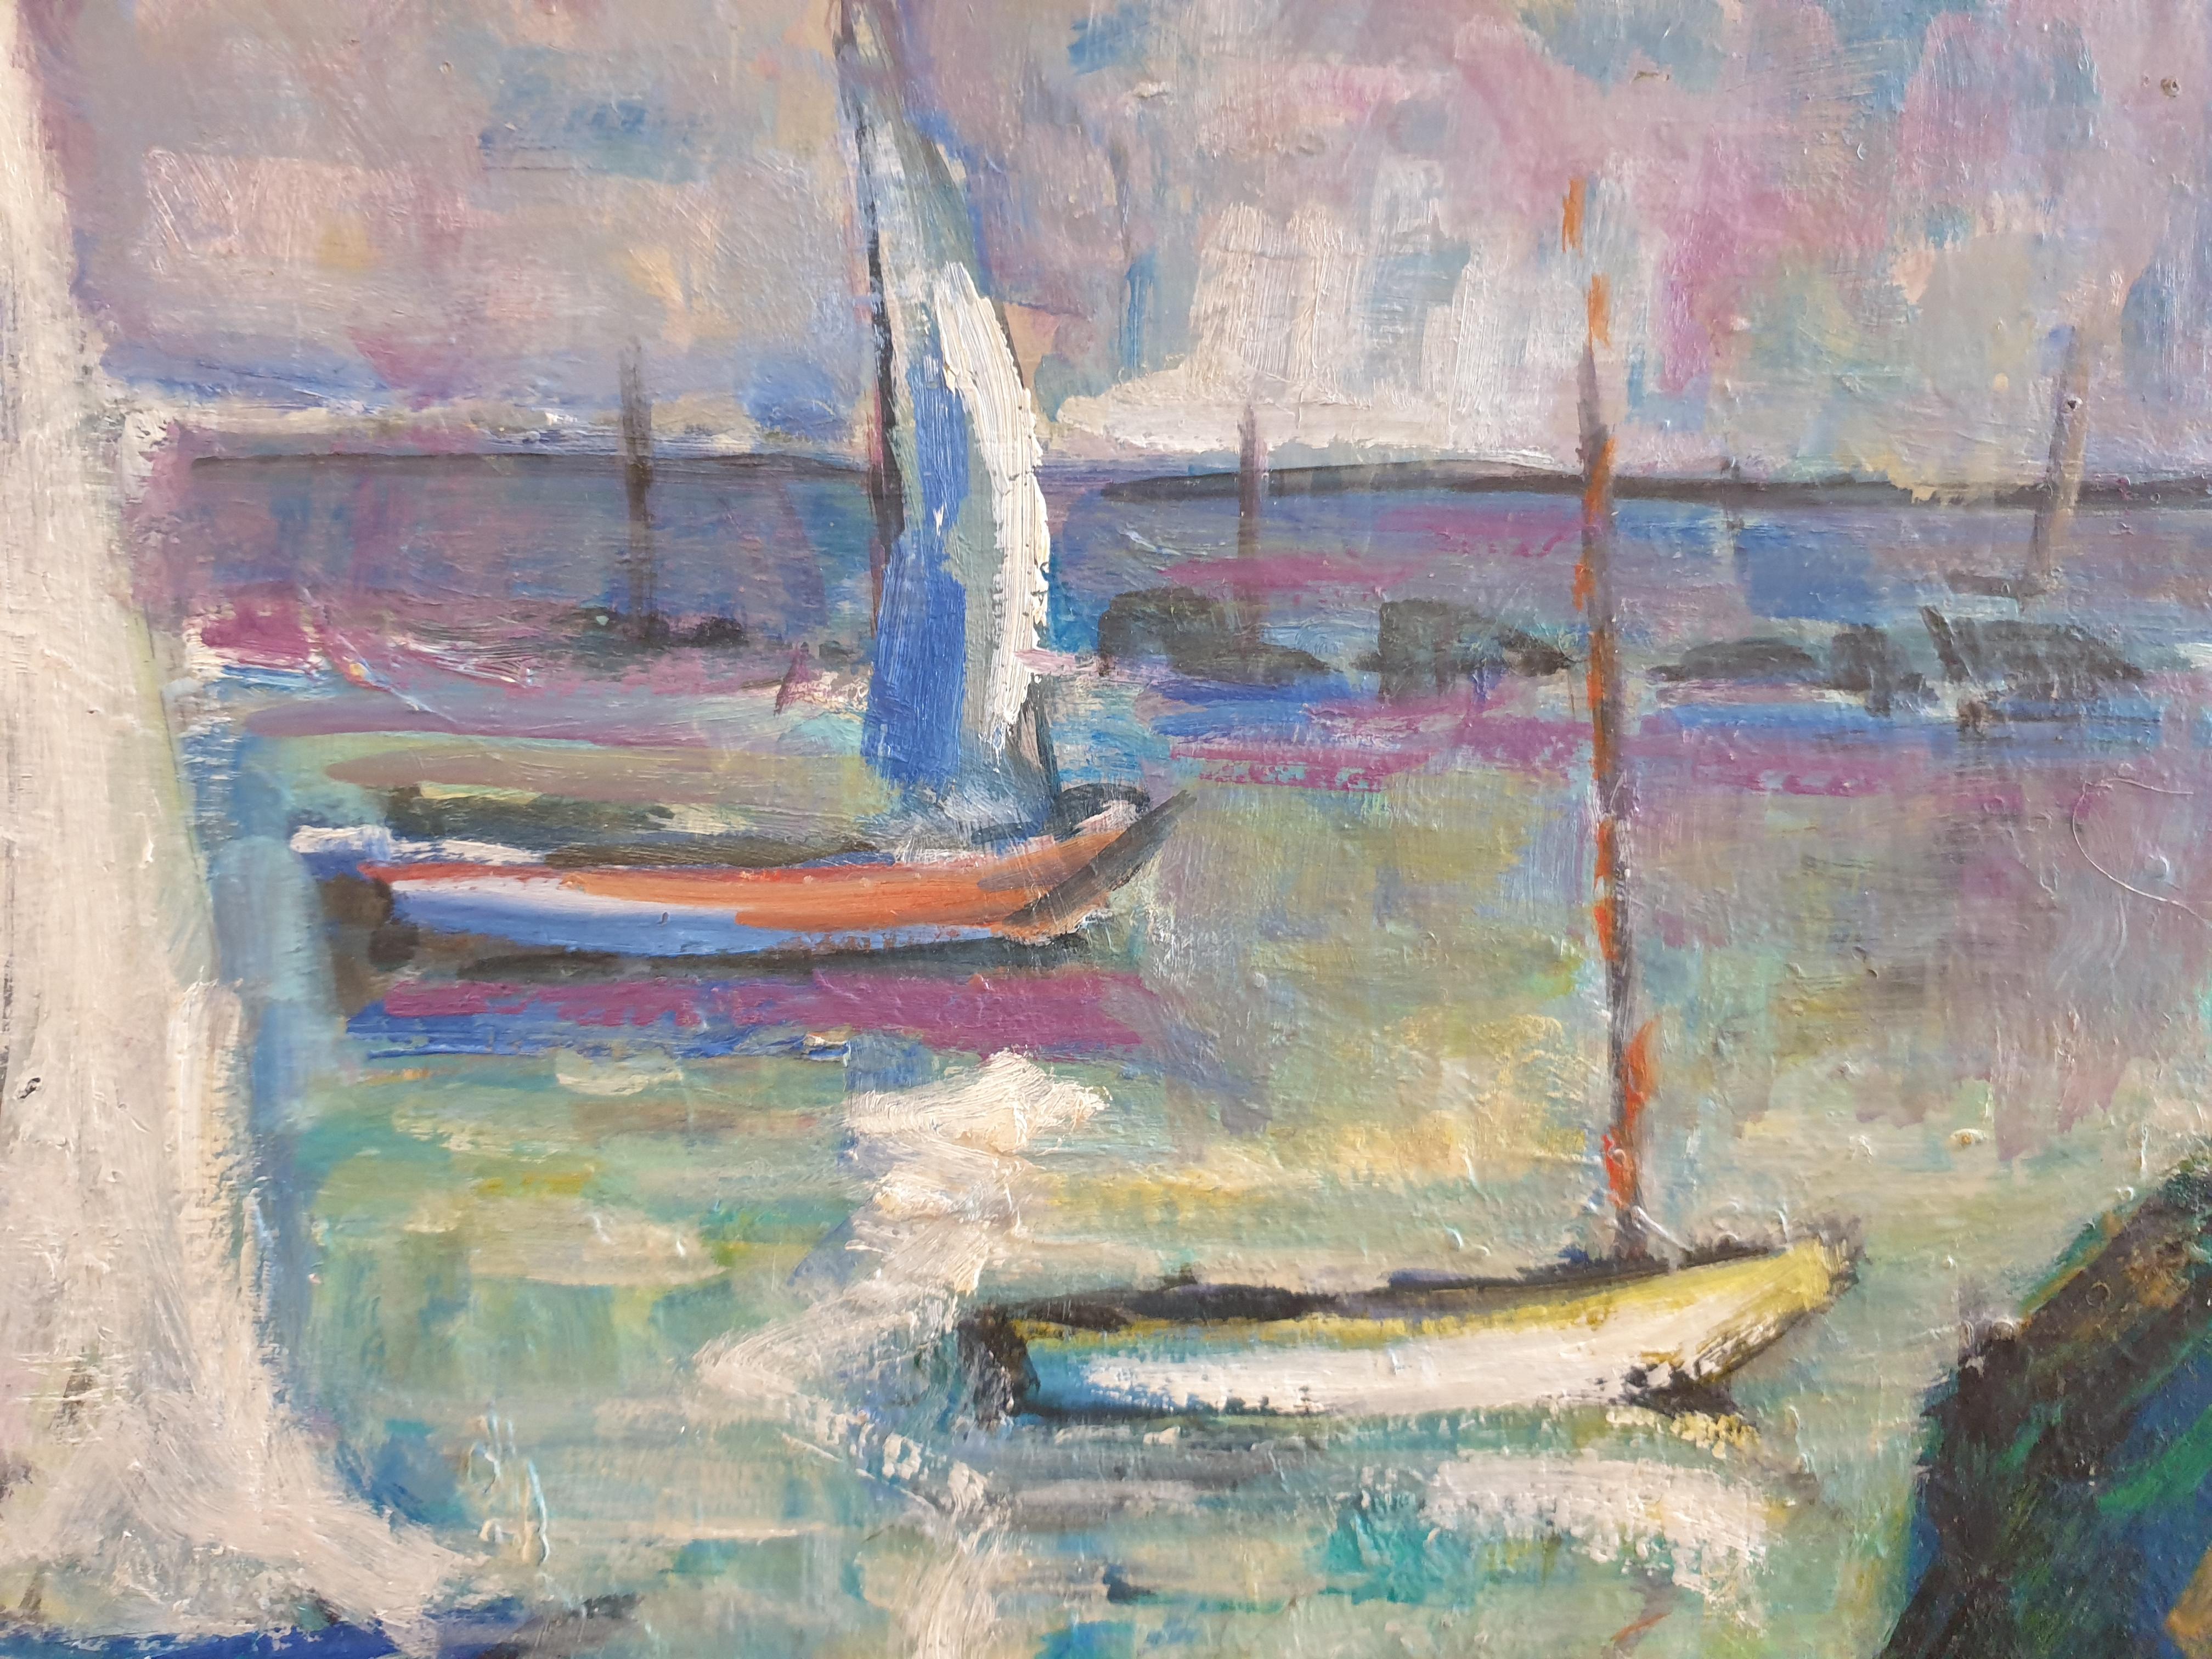 French Mid 20th Century oil on board Fauvist view of boats at anchor, probably near Nice in the South of France by Hyppolite Roger. Signed bottom left. The painting has another equally lovely painting of a provencal village street scene to the